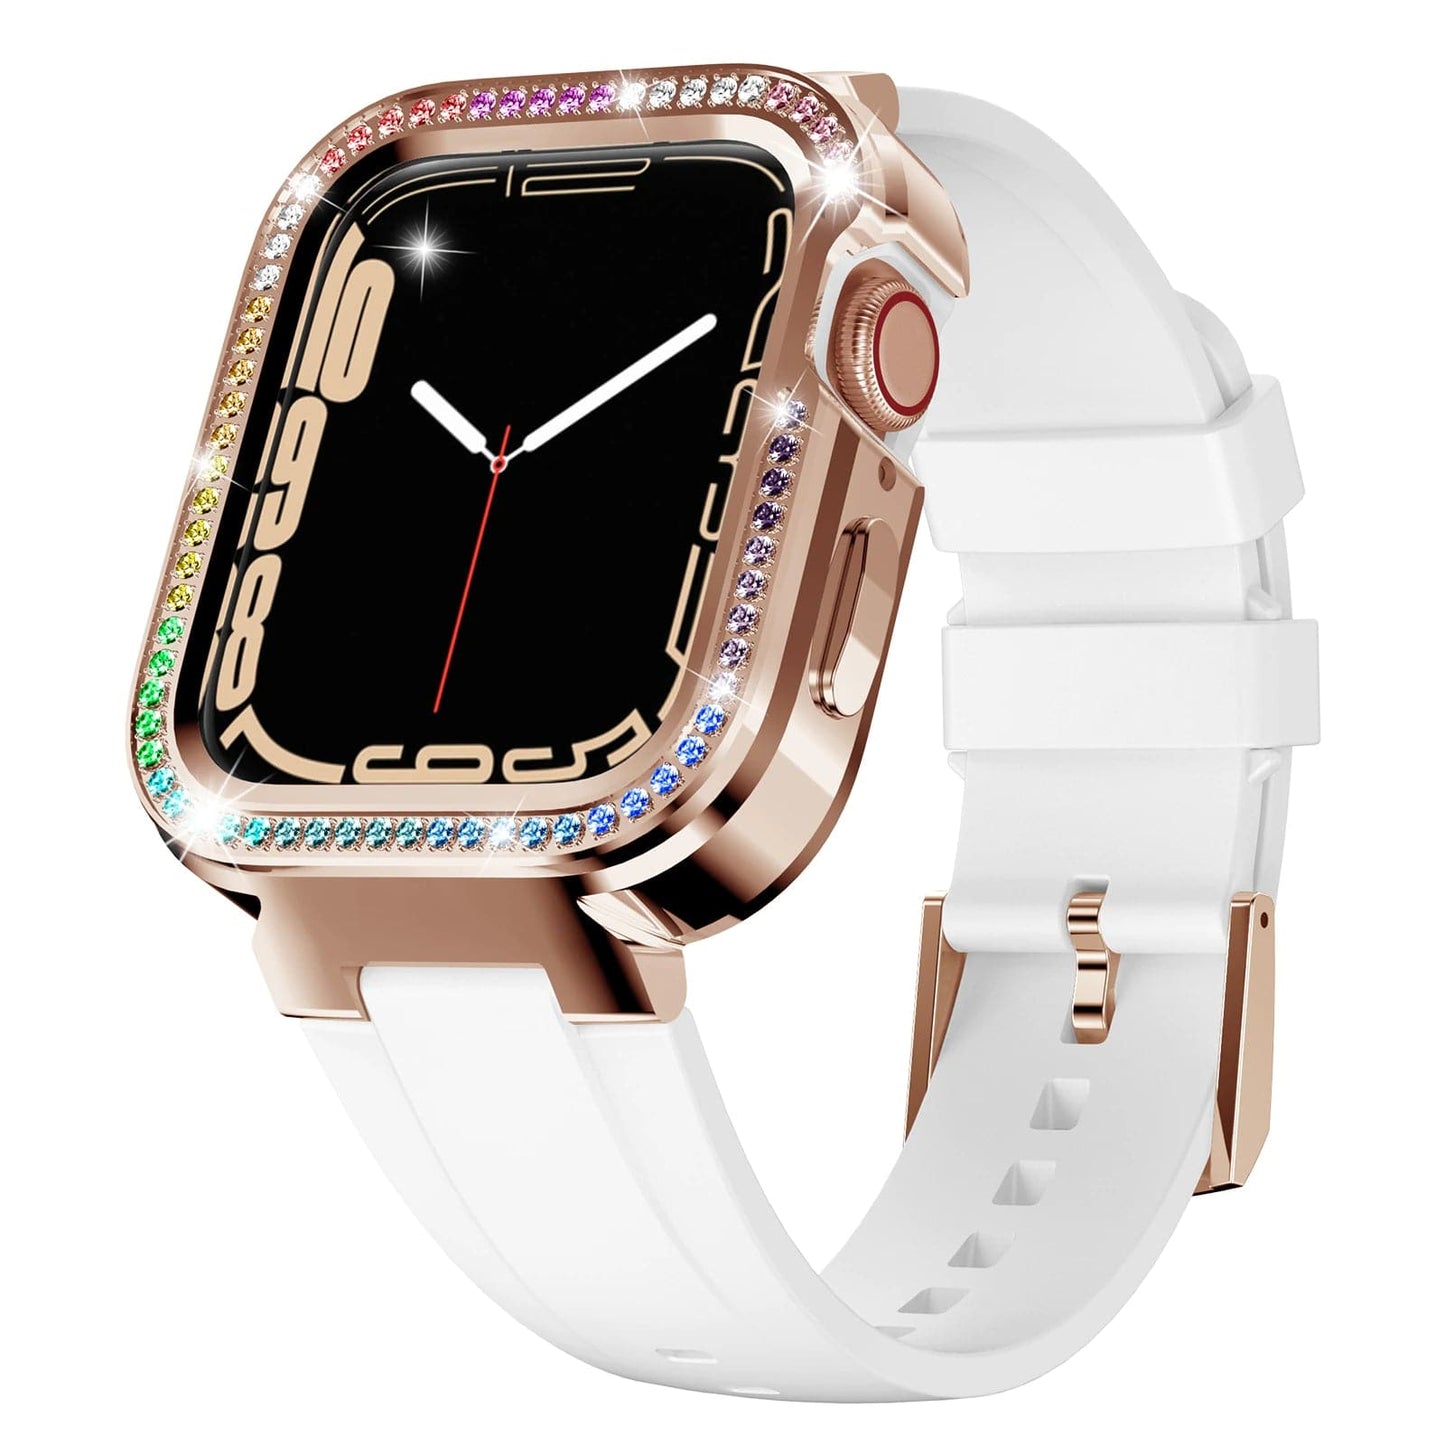 Casey Apple Watch Modification Kit For Women Scrunchapples 40mm White With Color Diamonds 